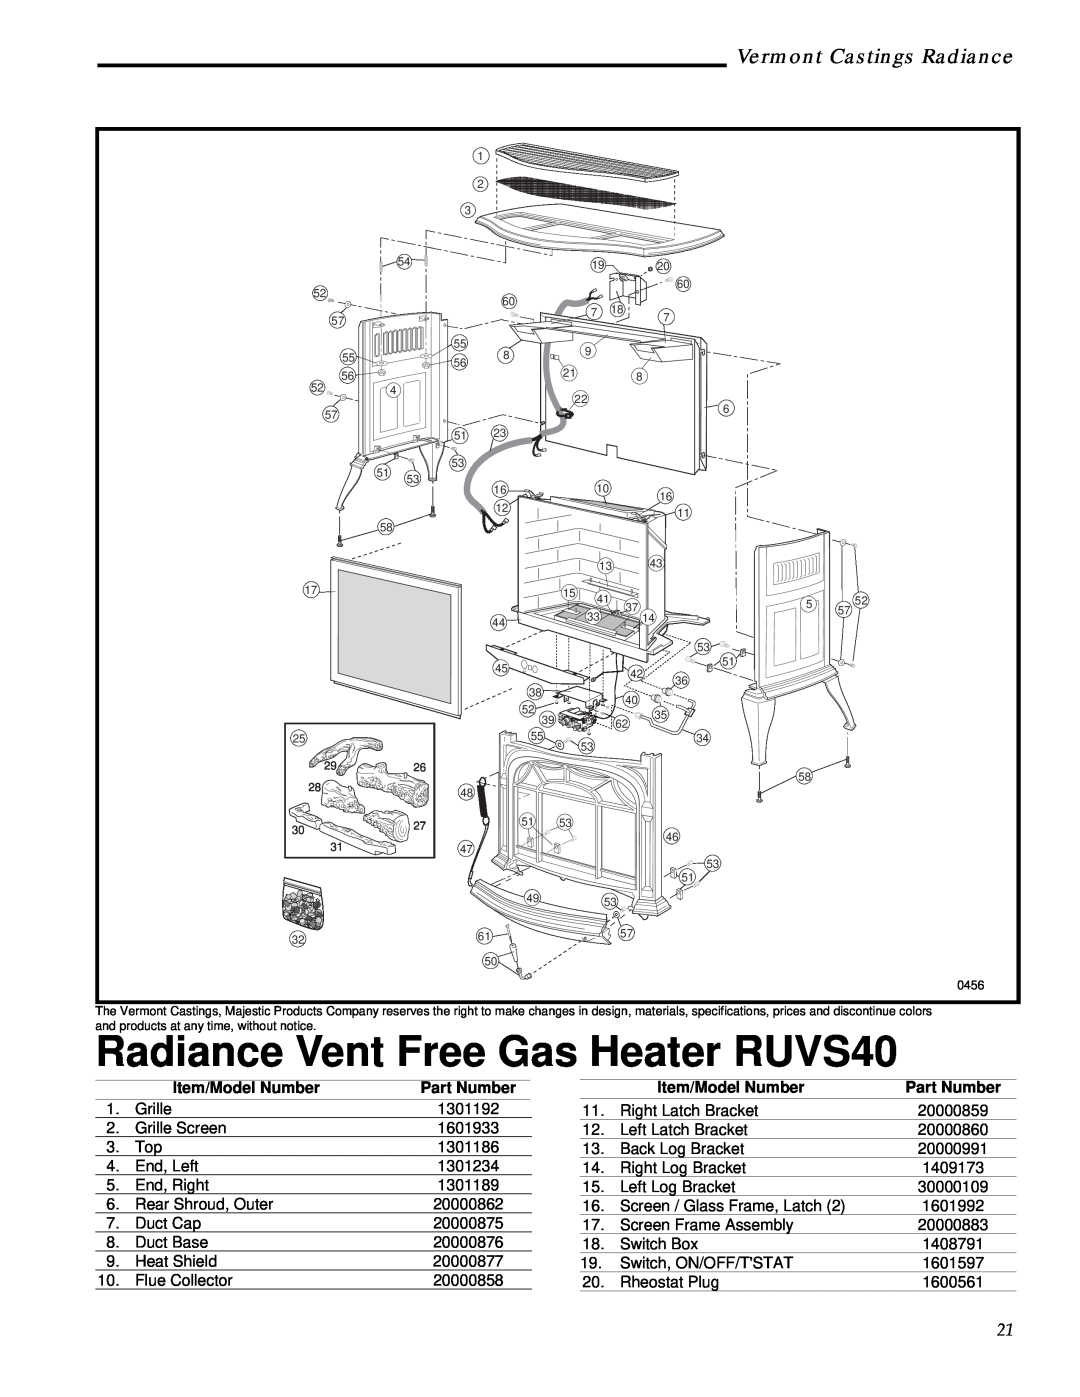 Vermont Casting manual Radiance Vent Free Gas Heater RUVS40, Vermont Castings Radiance, Item/Model Number, Part Number 